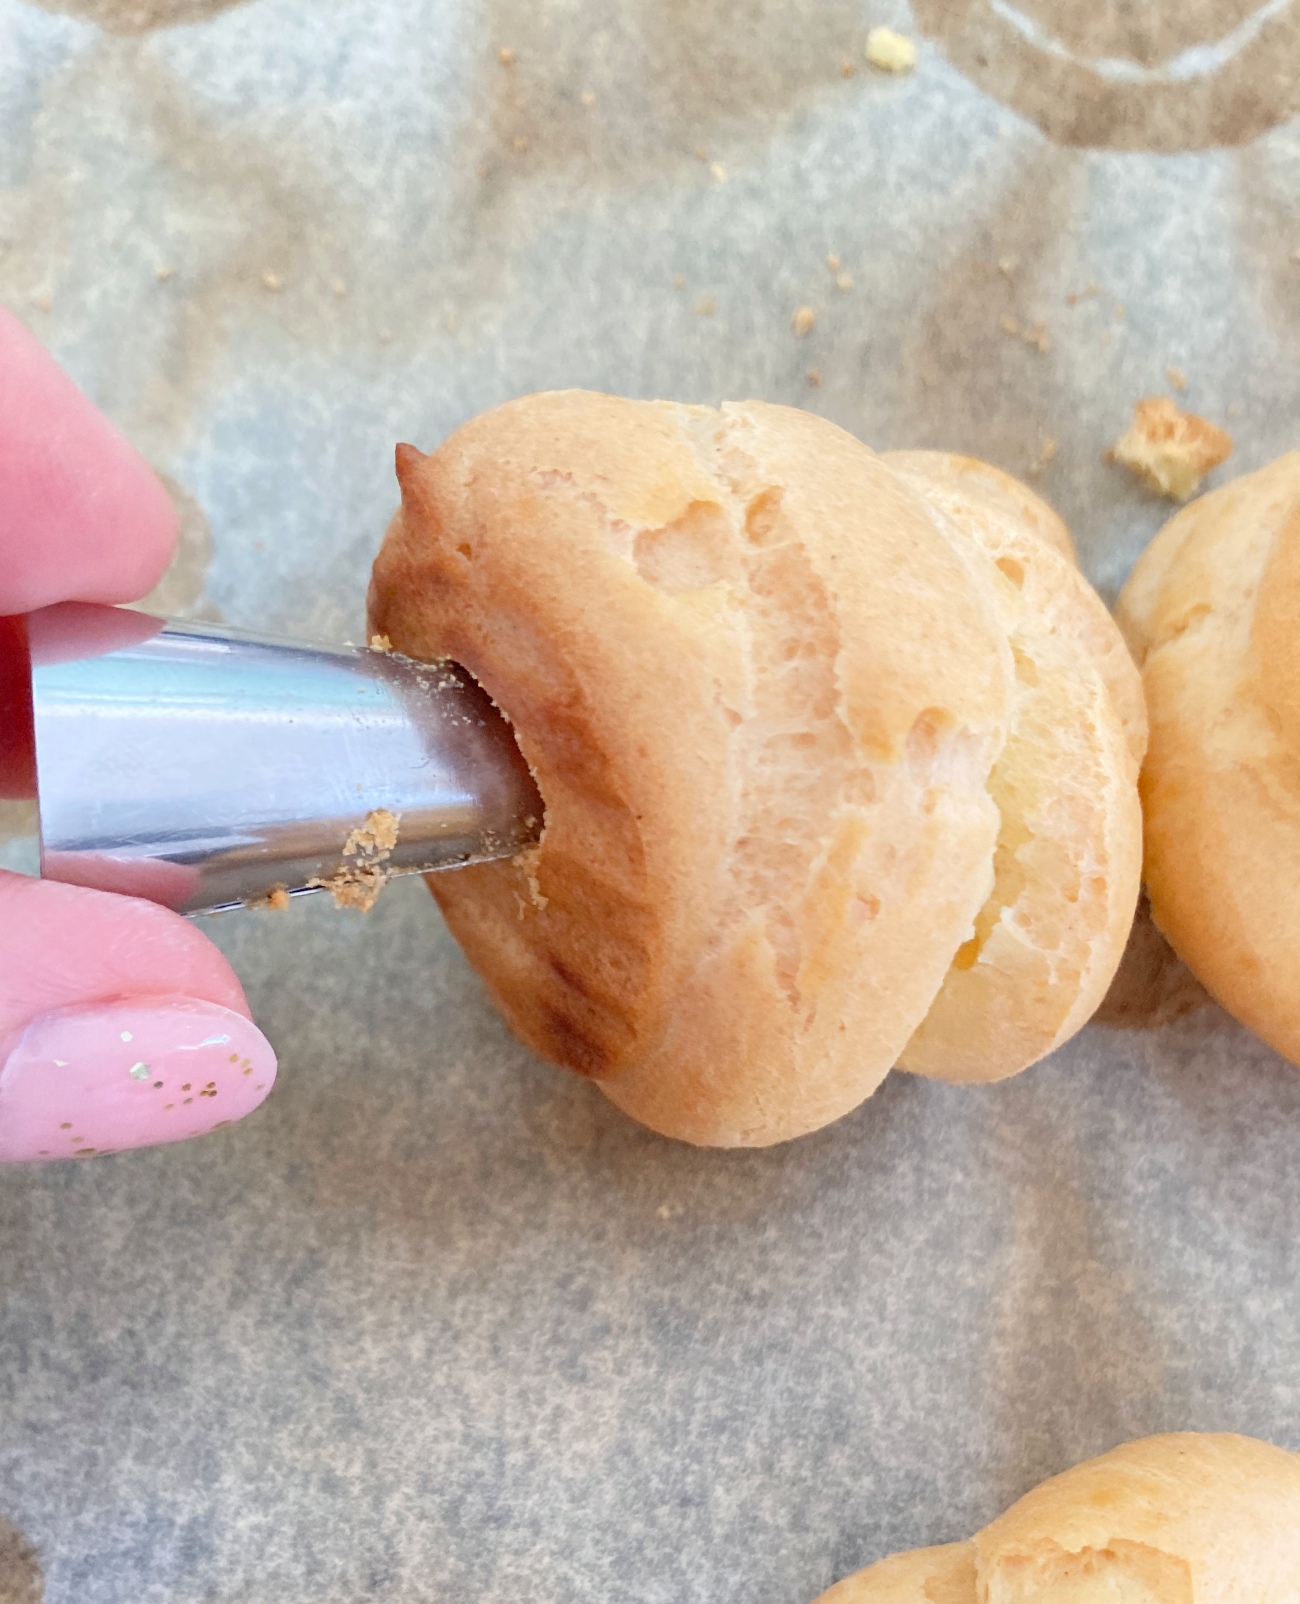 Use a clean piping tip to poke a hole in the bottom of each pastry before setting on a wire rack to cool completely.